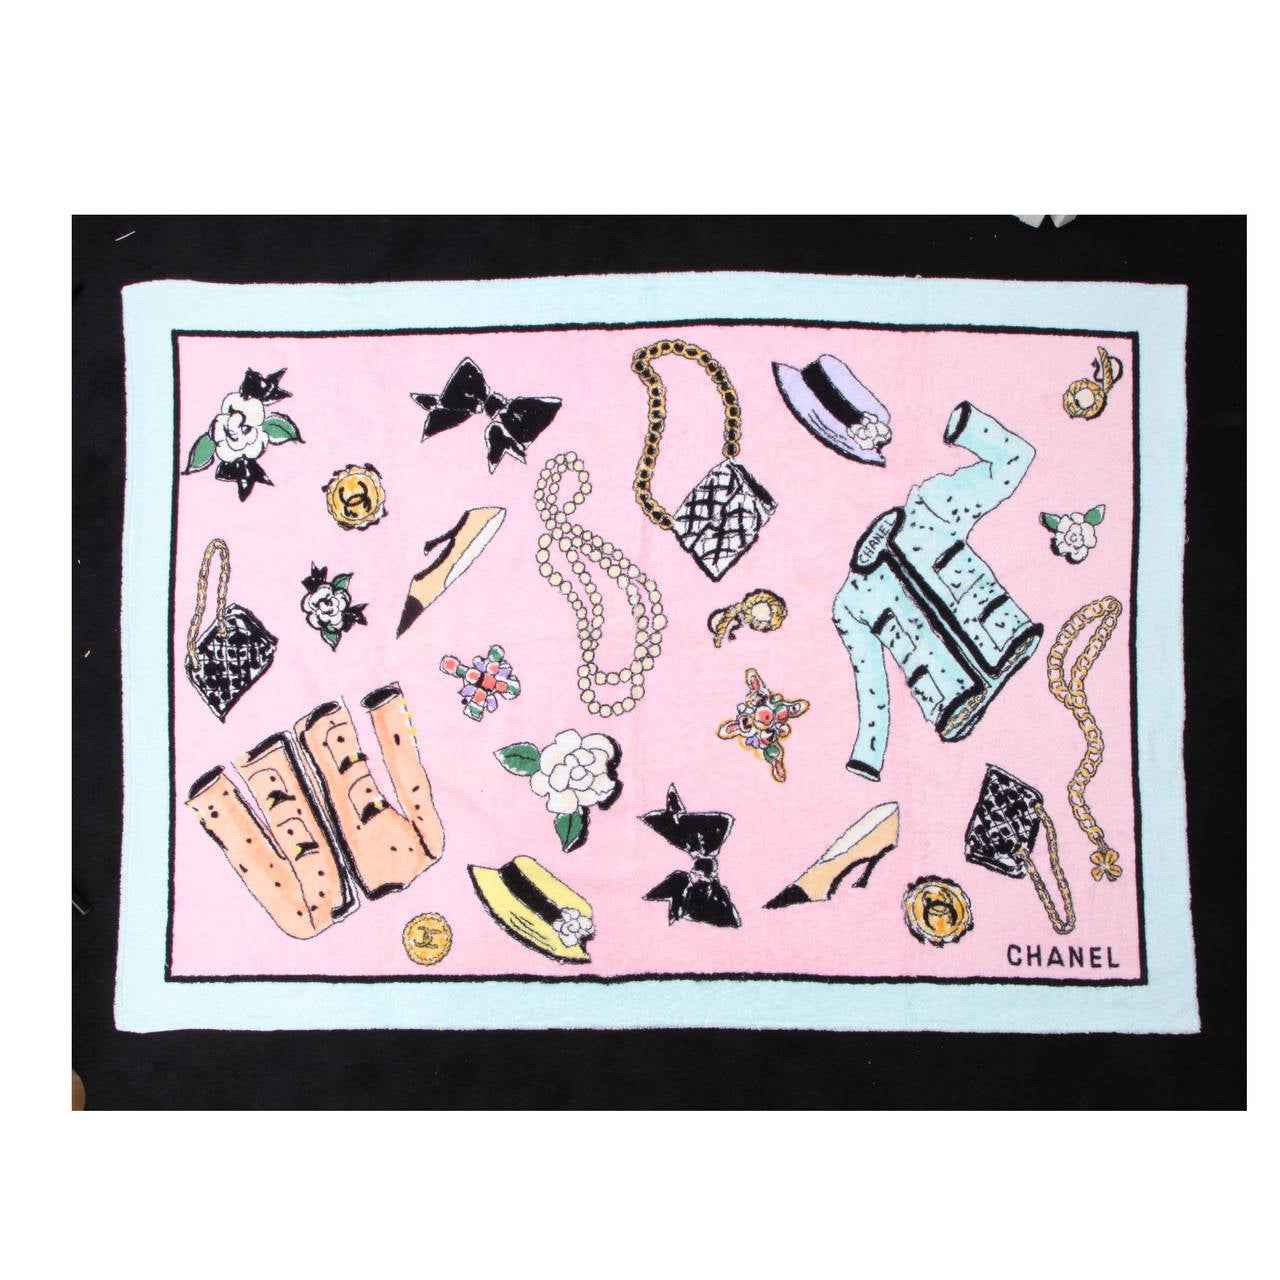 Chanel Rare 1996 Pink Beach Towel Never Been Used For Sale